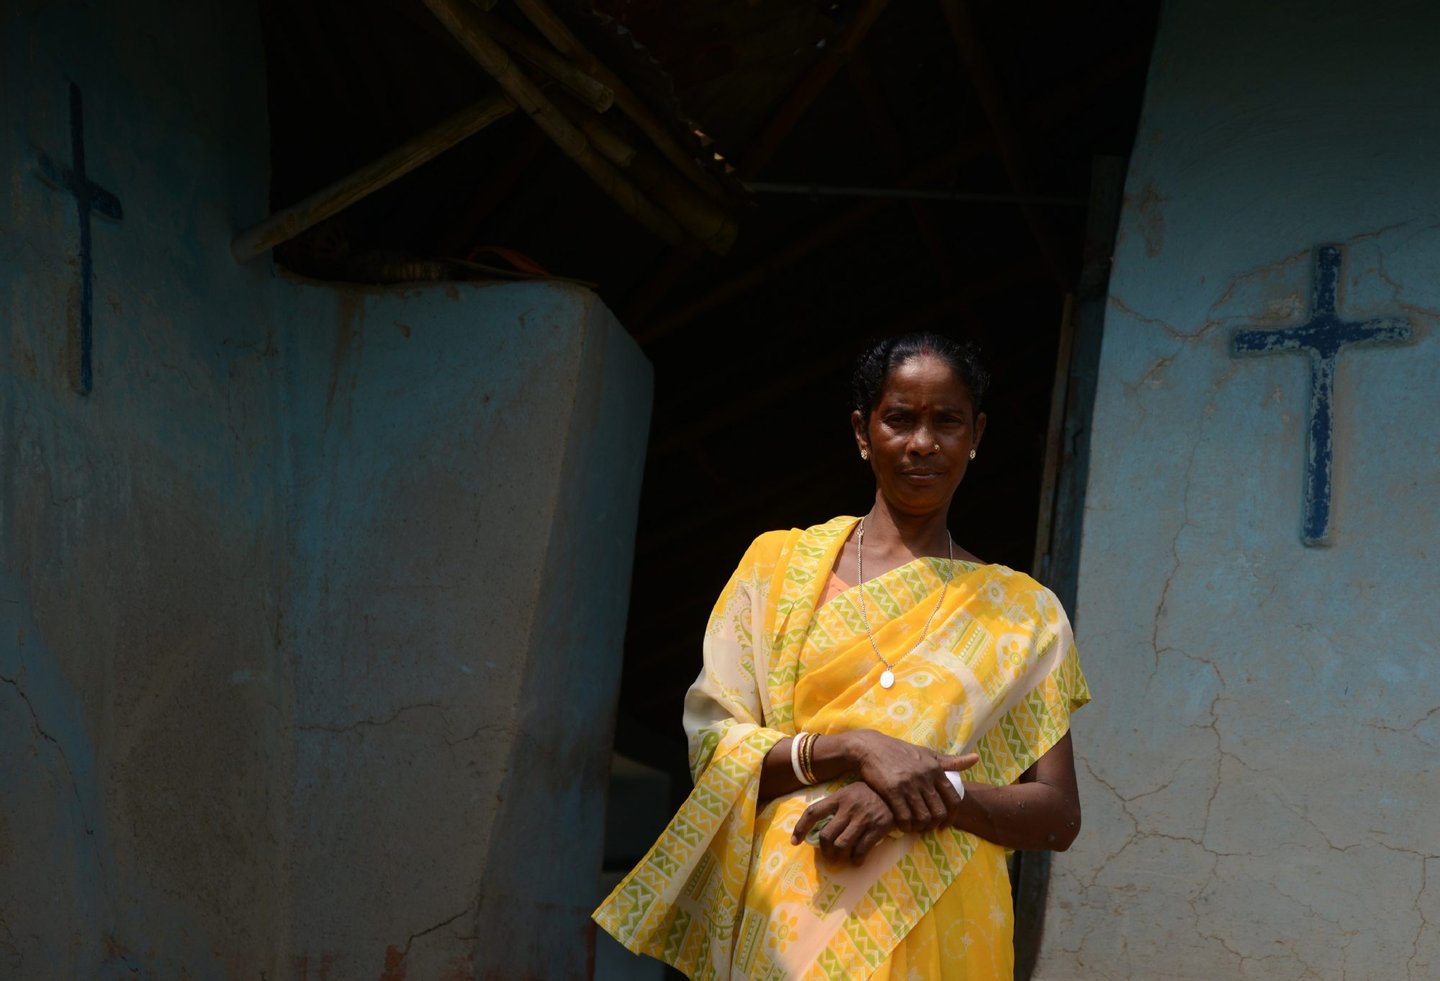 In this photograph taken on September 1, 2016, Indian woman Monica Besra poses at her home village of Nakur in Danogram, 500 kilometres (310 miles) from the eastern city of Kolkata. Besra, a Bengali tribal woman, became an overnight sensation in September 1998 when she alleged that a picture and a medallion of Mother Teresa had cured a cancerous tumour. Known as the "Angel of Mercy" for serving the poor in India, Mother Teresa will be declared a saint on September 4, amid great fanfare. But as the Vatican prepares her canonisation, allegations of fraud and medical negligence cloud her legacy. / AFP / Diptendu DUTTA / TO GO WITH AFP STORY: India-belief-religion-health, by Annie Banerji (Photo credit should read DIPTENDU DUTTA/AFP/Getty Images)